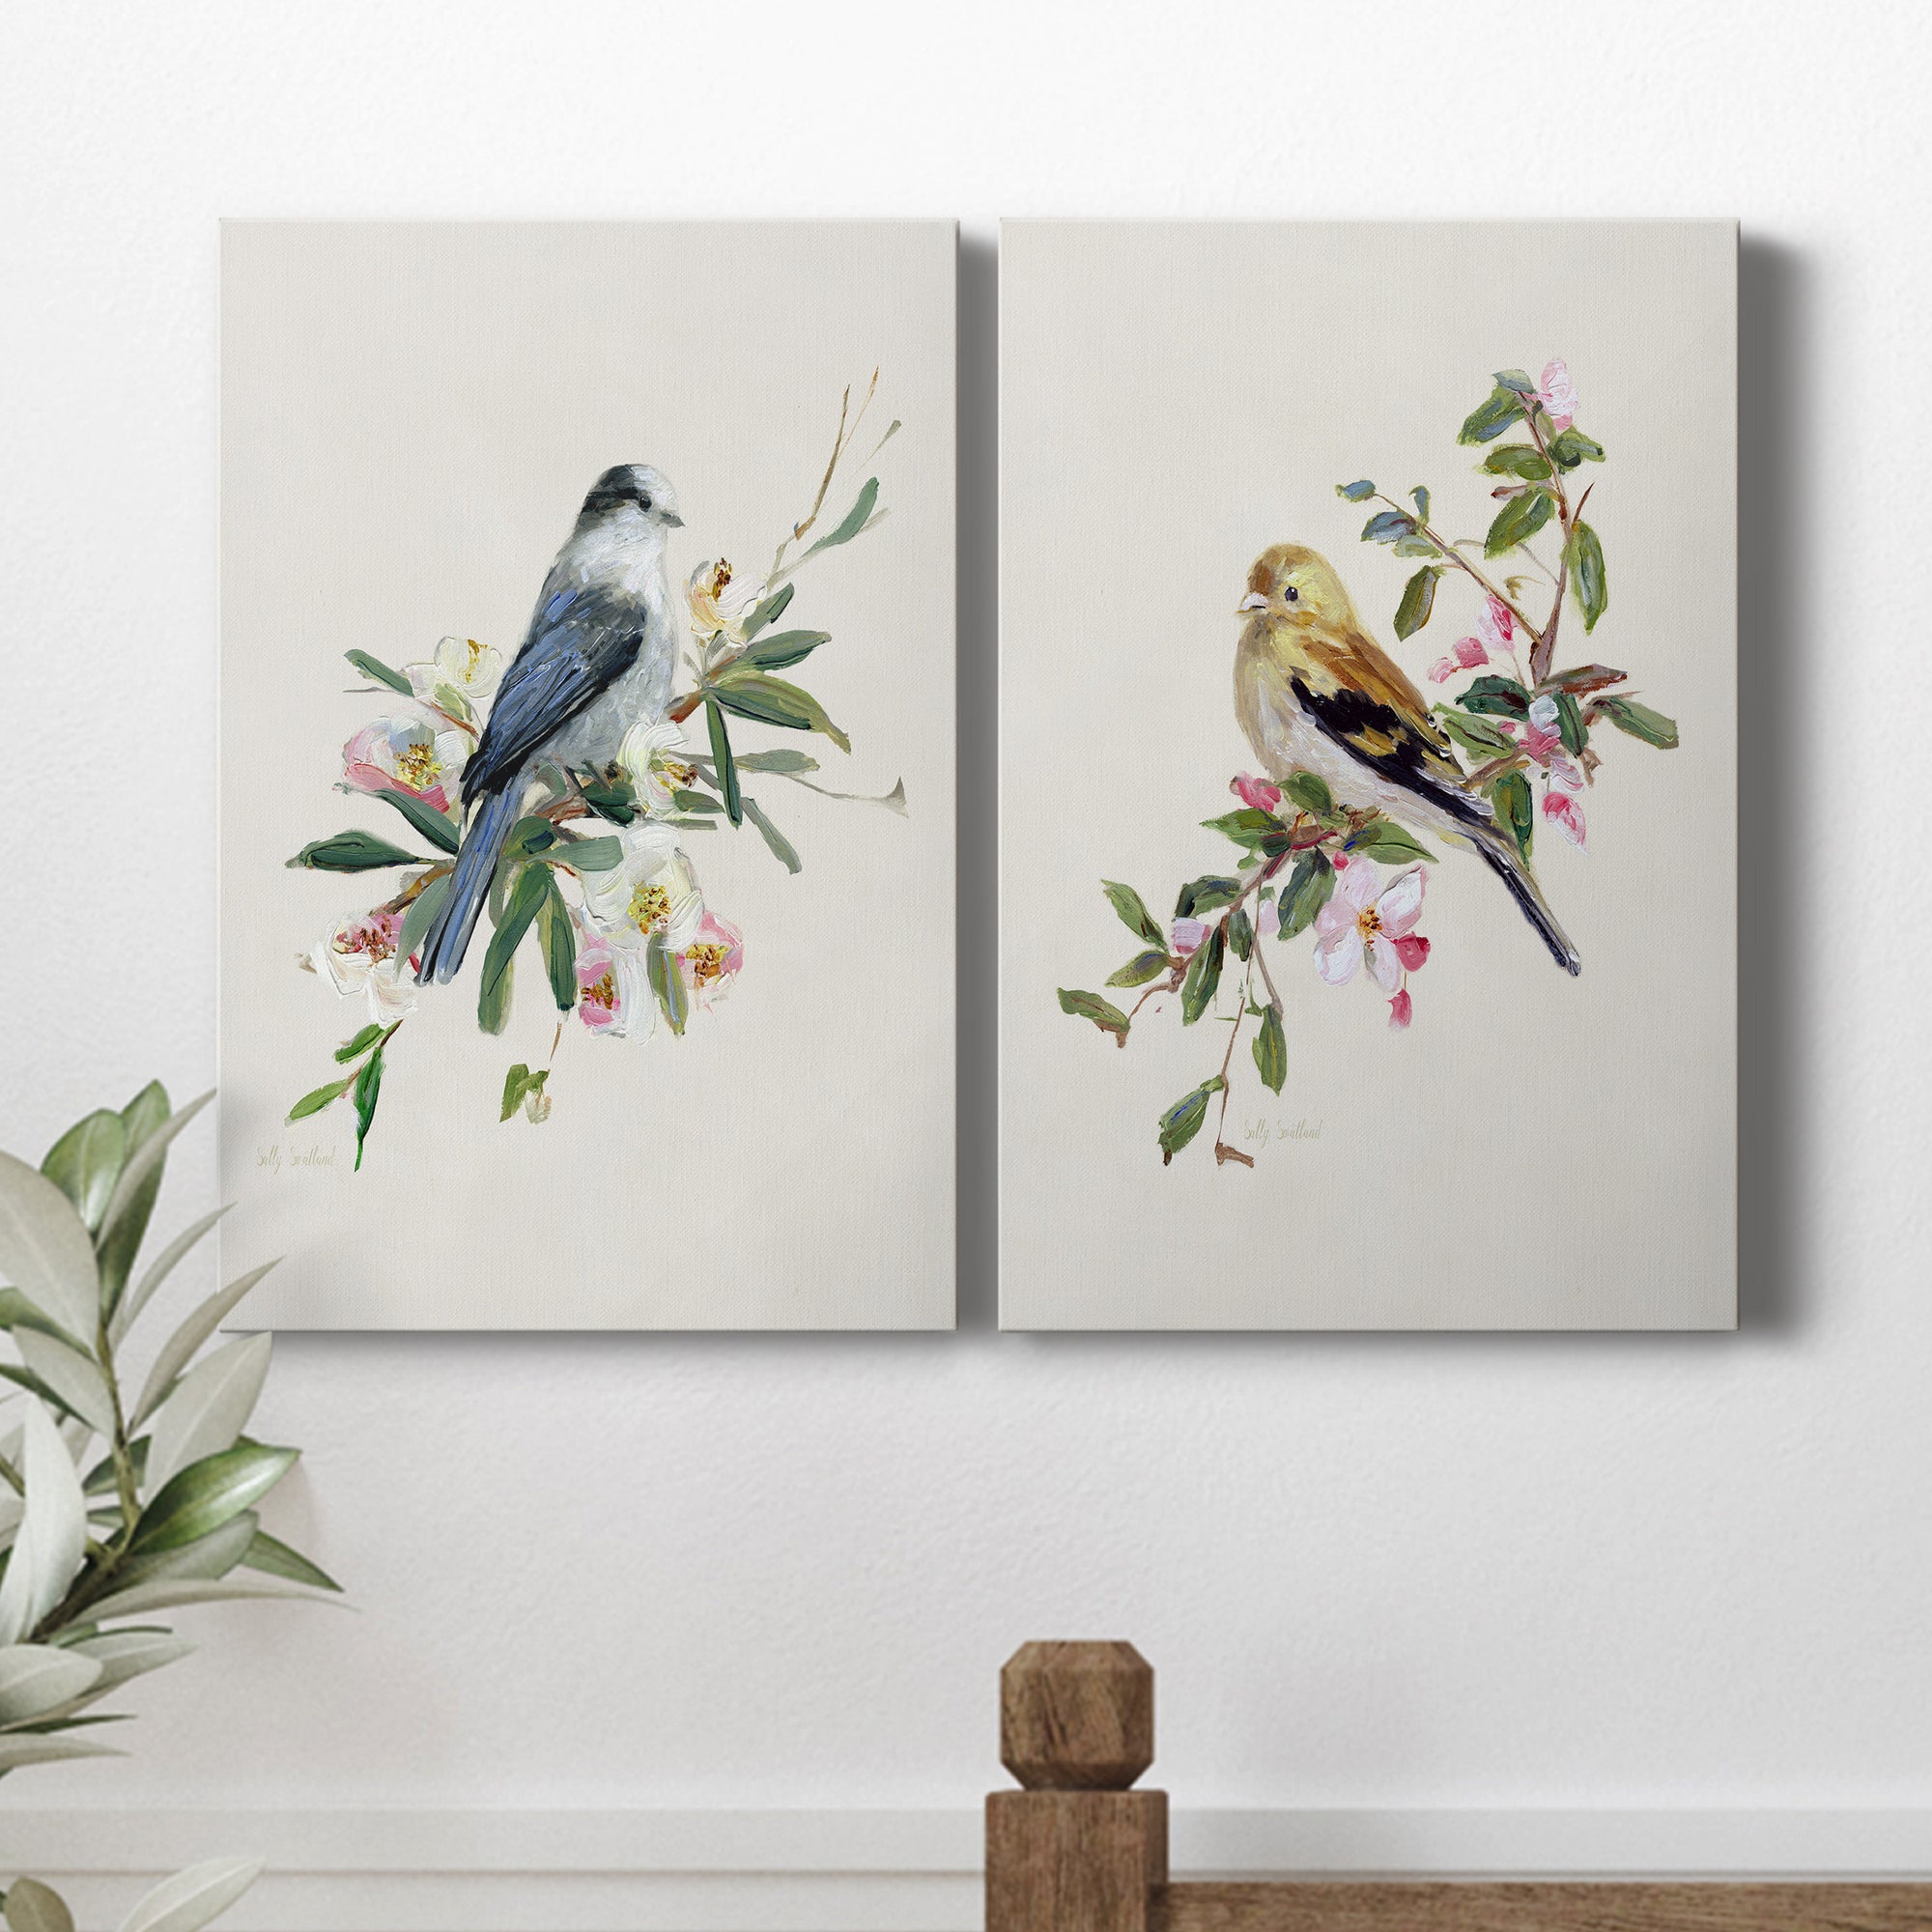 Spring Song Gray Jay Premium Gallery Wrapped Canvas - Ready to Hang - Set of 2 - 8 x 12 Each